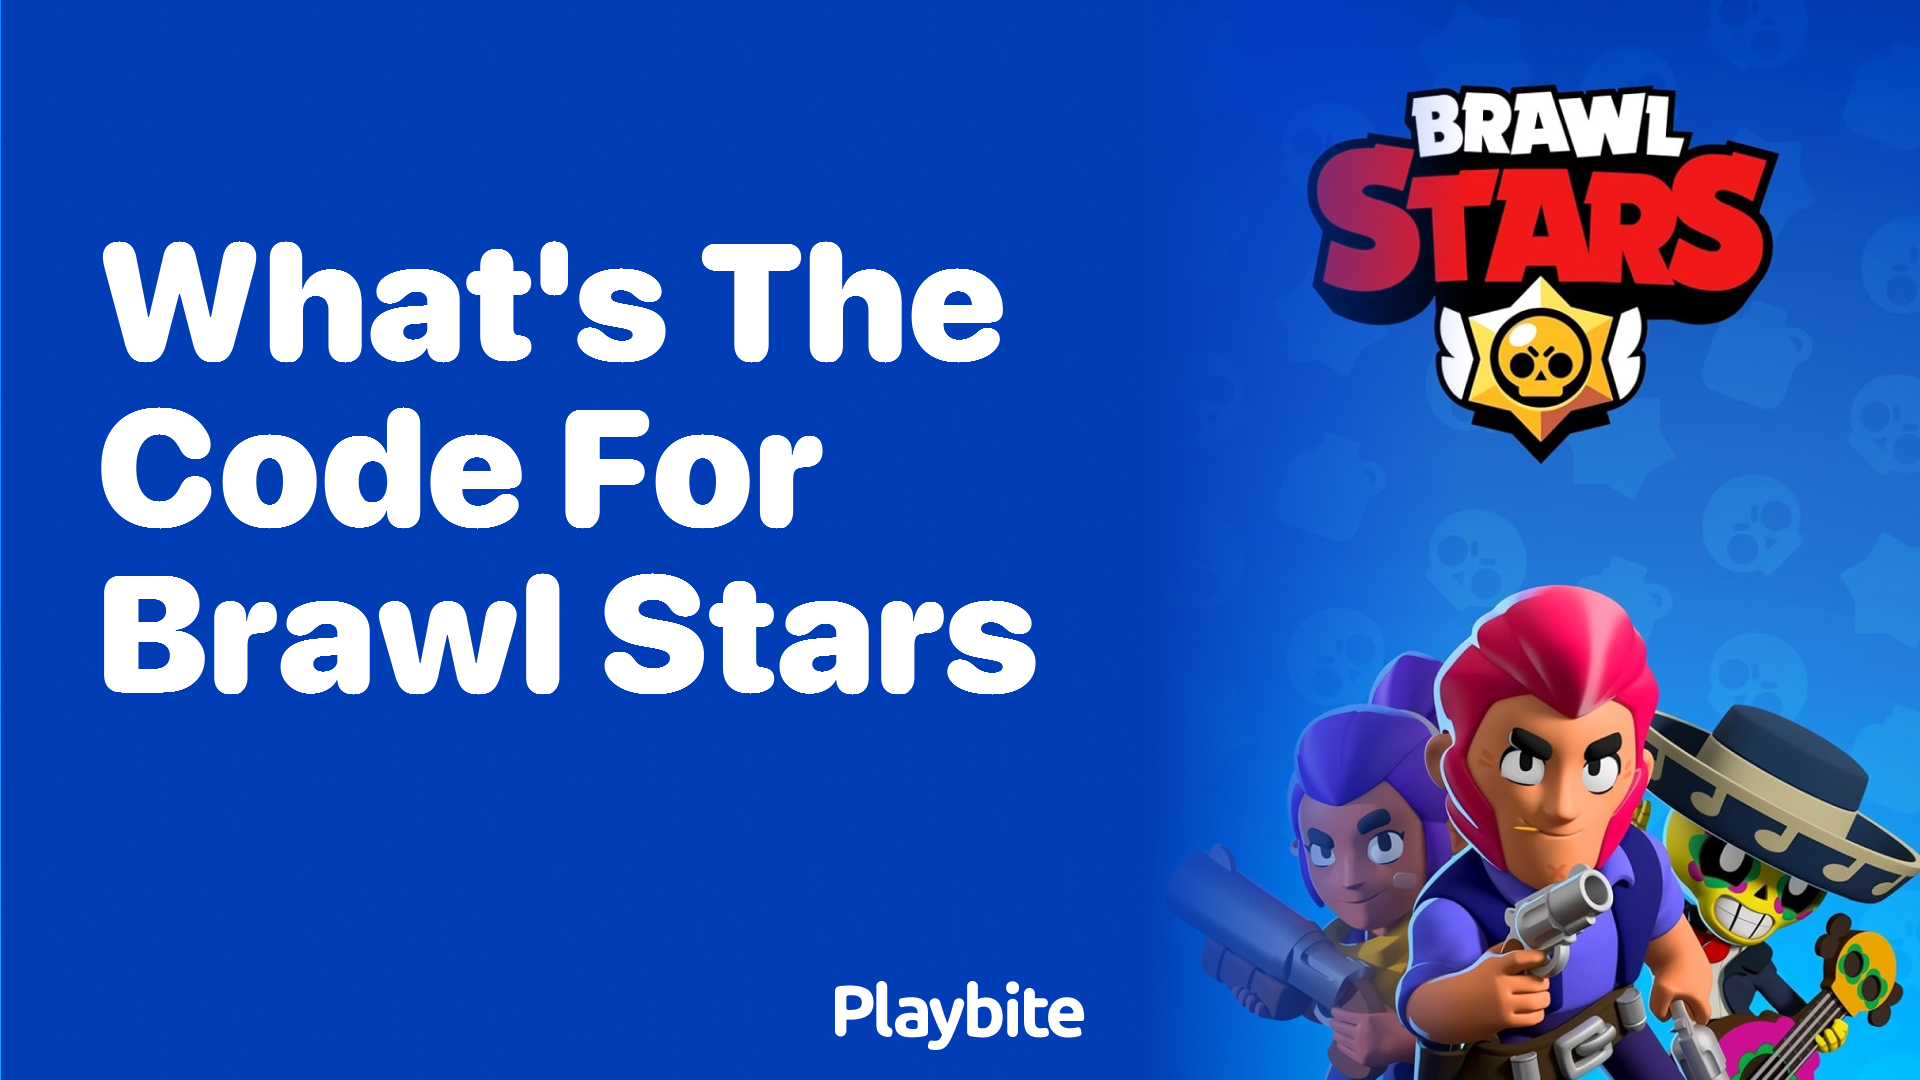 What's the Code for Brawl Stars? - Playbite